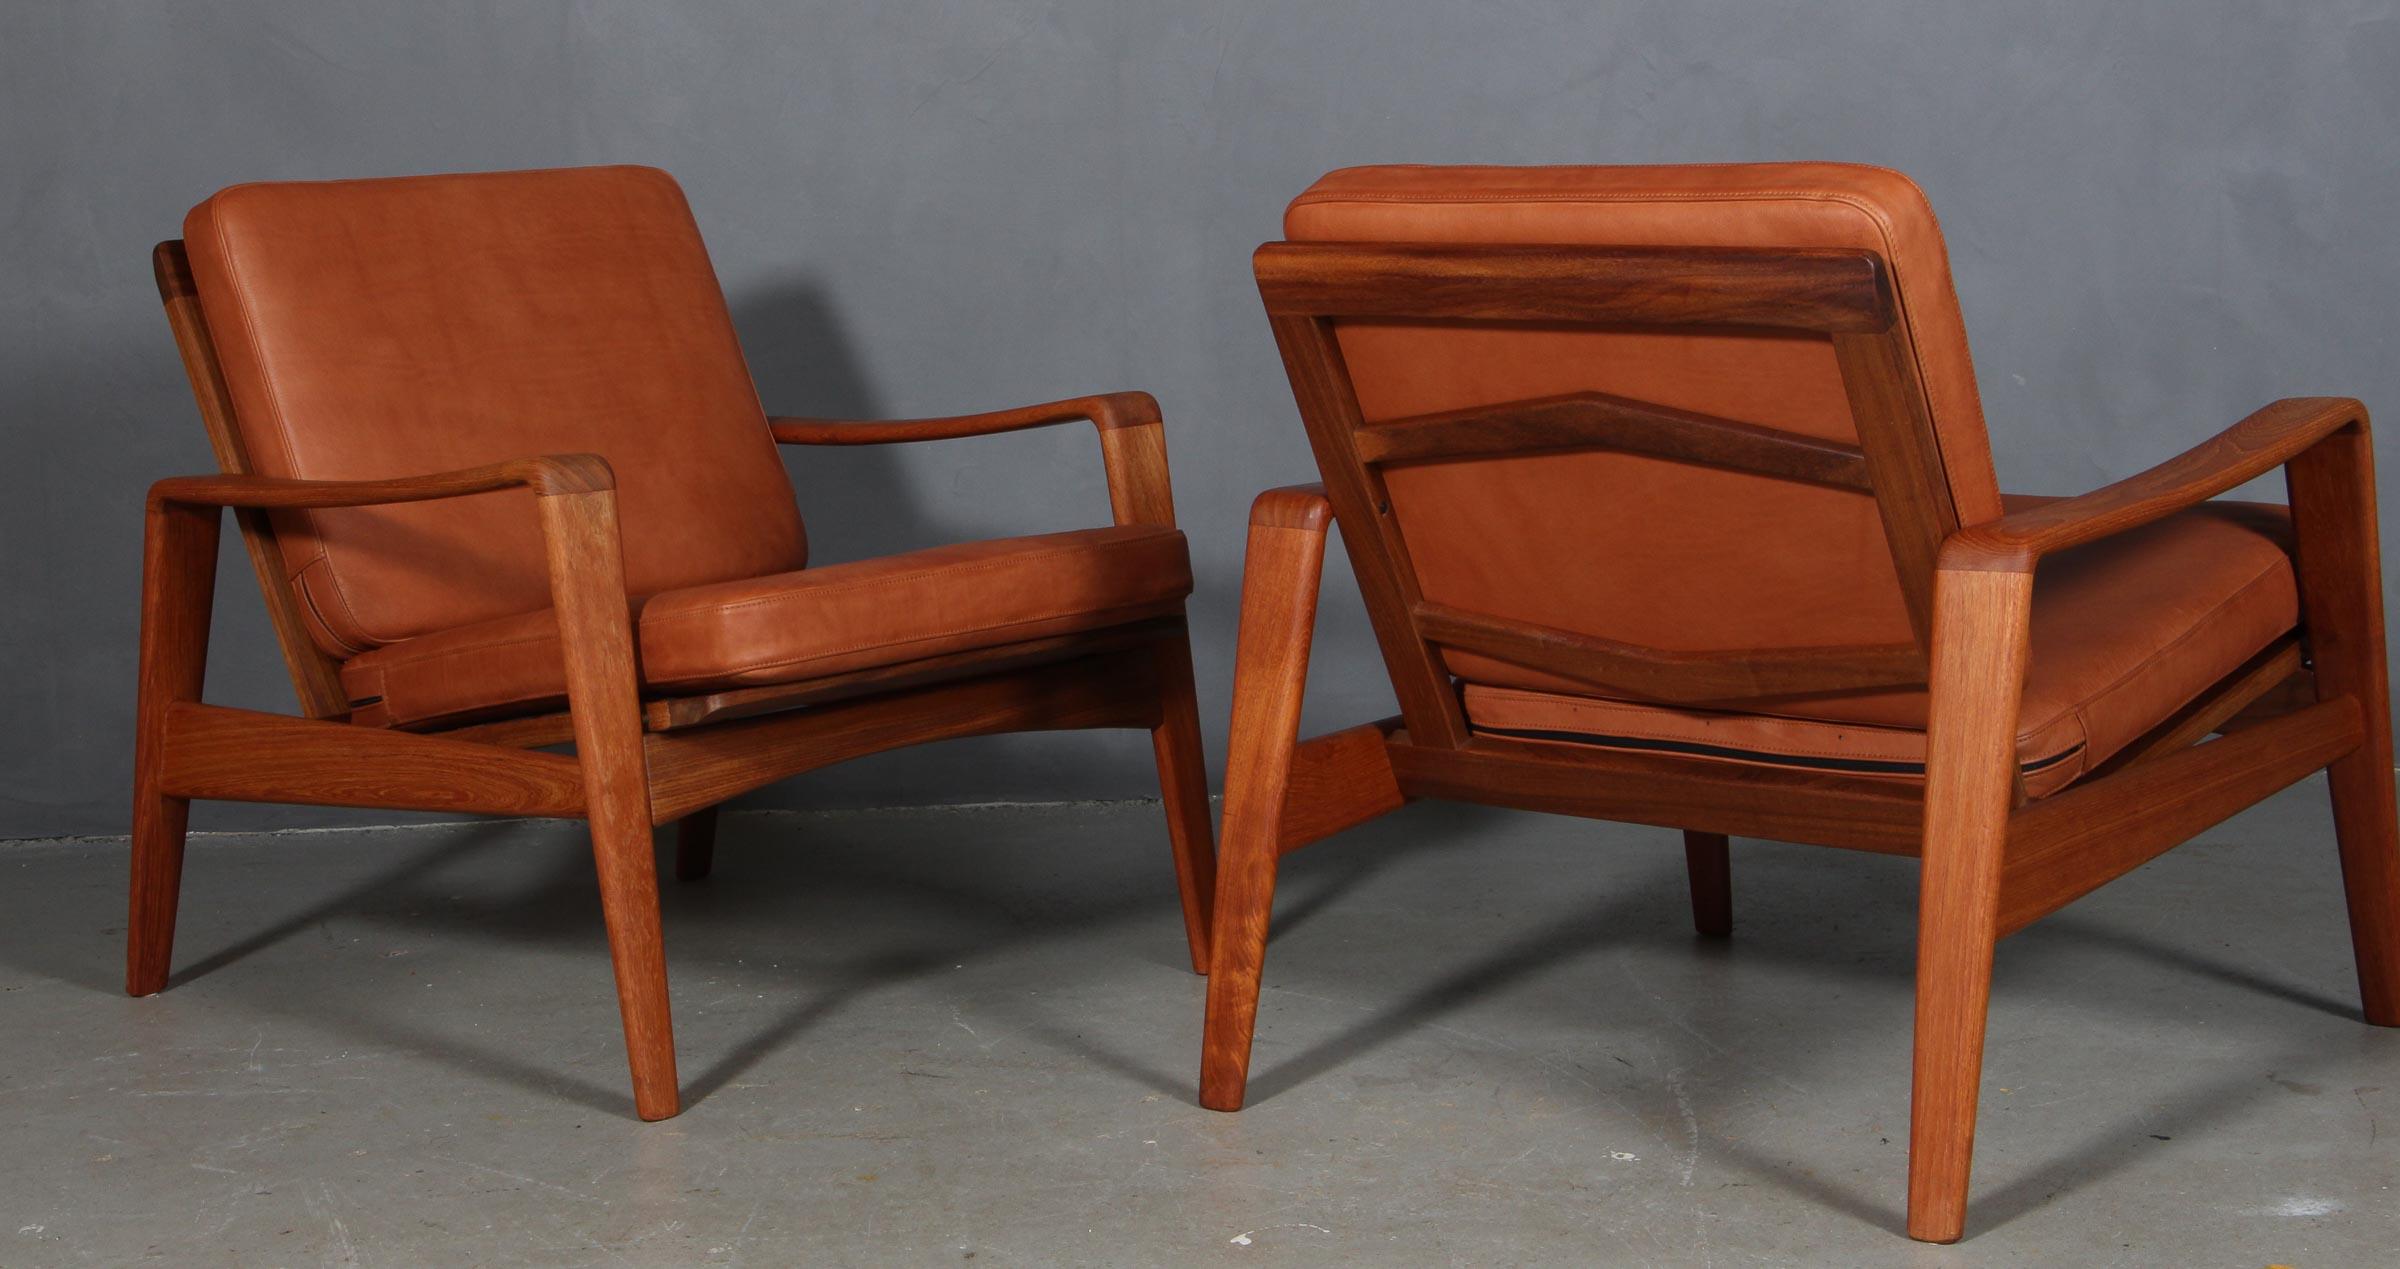 Mid-20th Century Arne Wahl Iversen, Set of Lounge Chairs